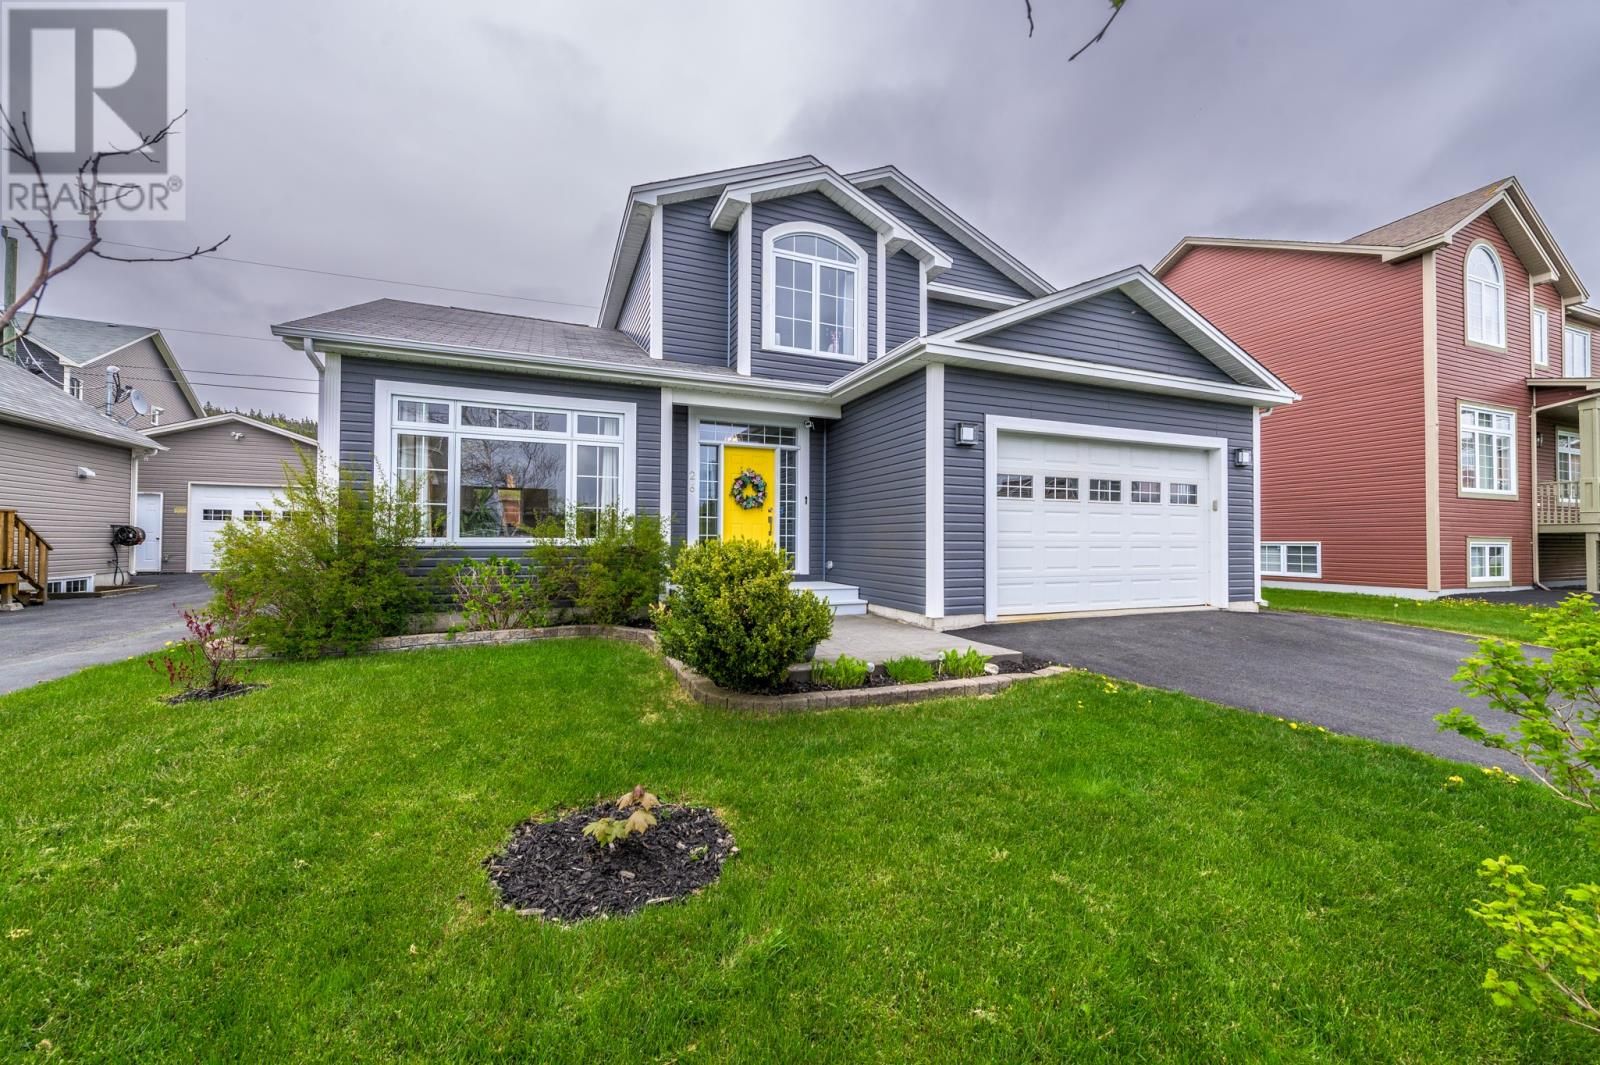 Main Photo: 26 ATLANTICA Drive in PARADISE: House for sale : MLS®# 1262508